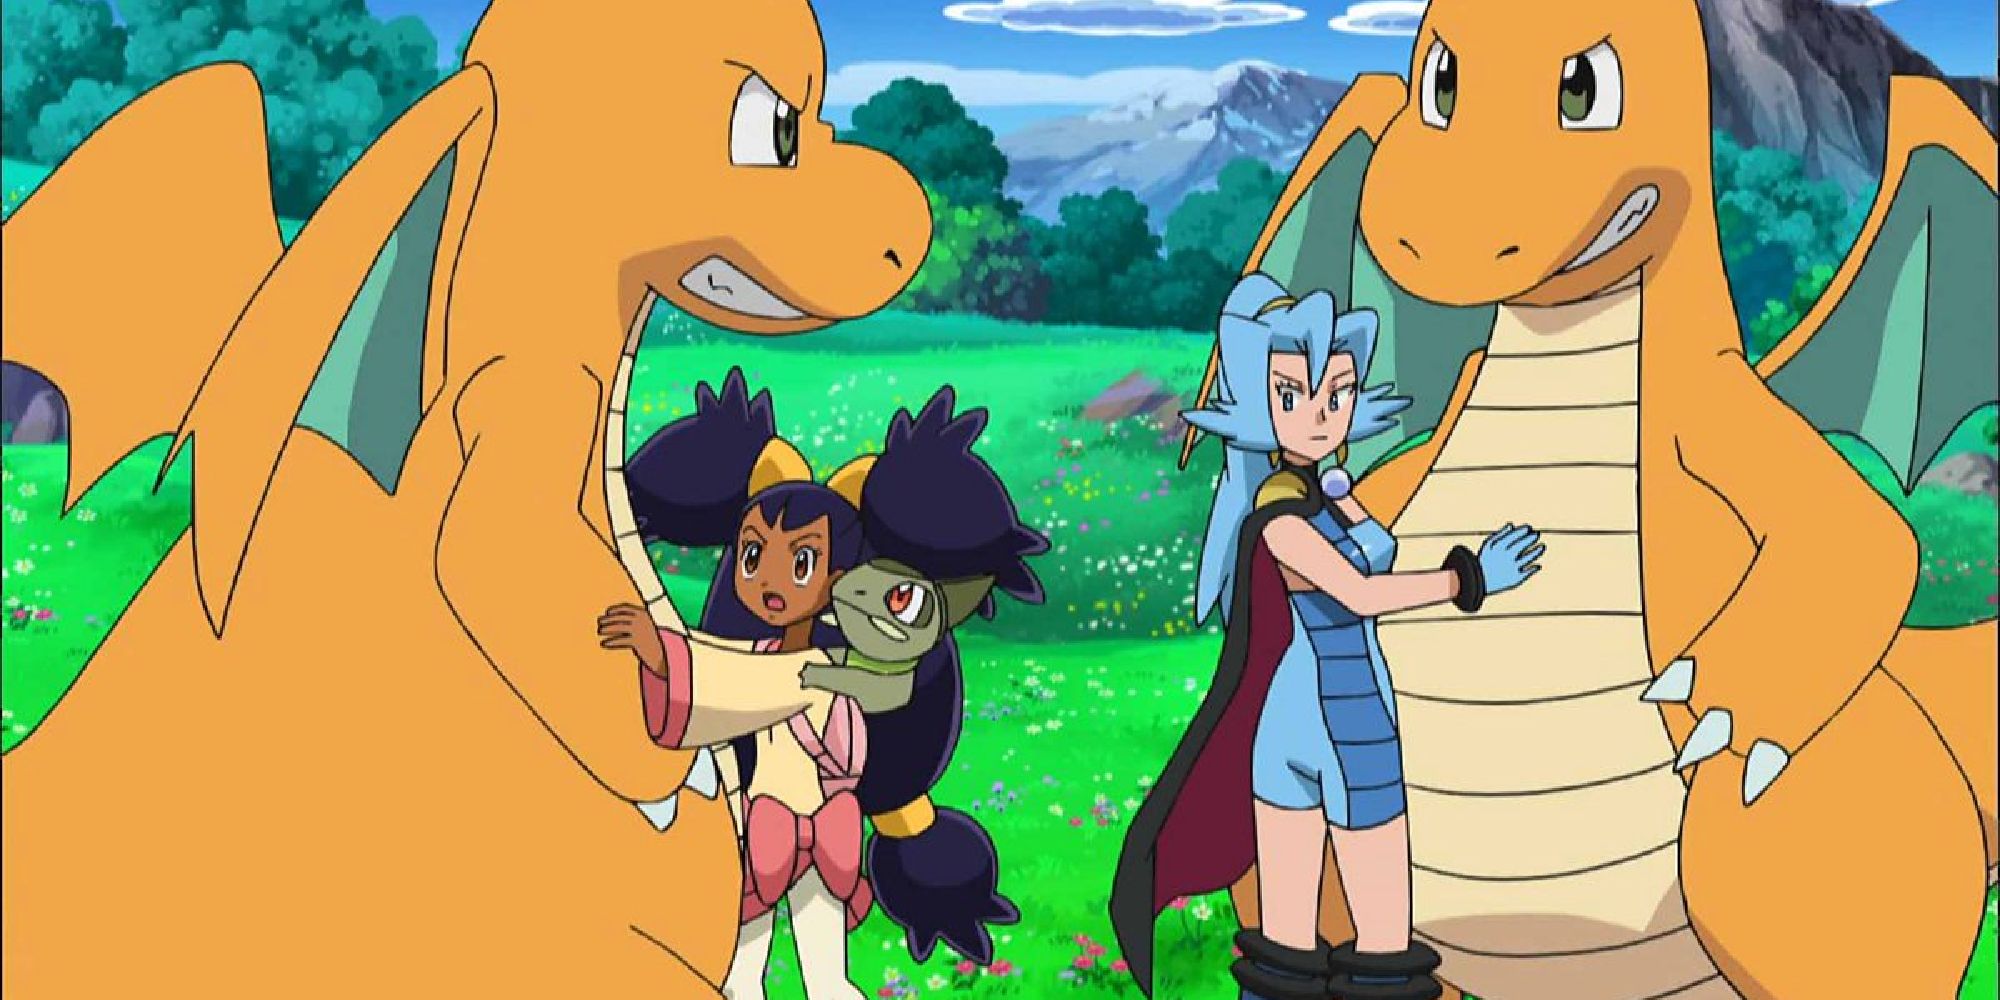 Iris and Axew calming down her Dragonite as it feuds with Clair's Dragonite